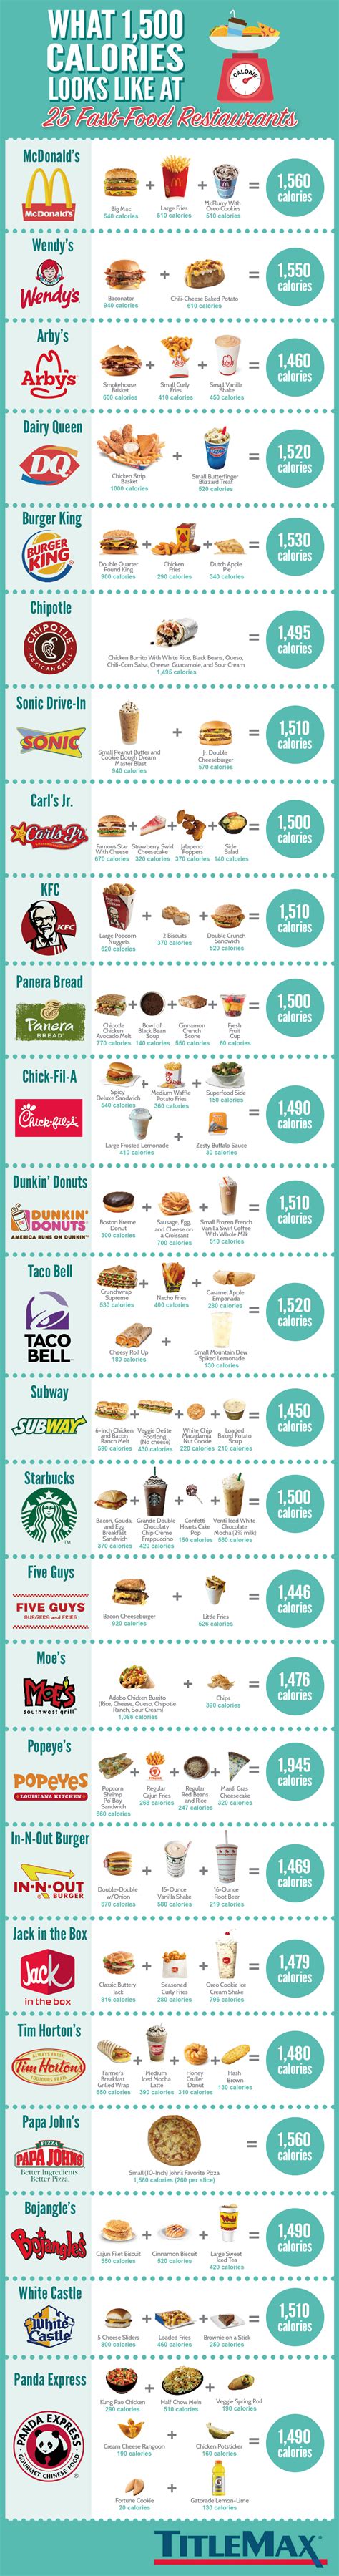 What 1500 Calories Looks Like At 25 Fast Food Restaurants